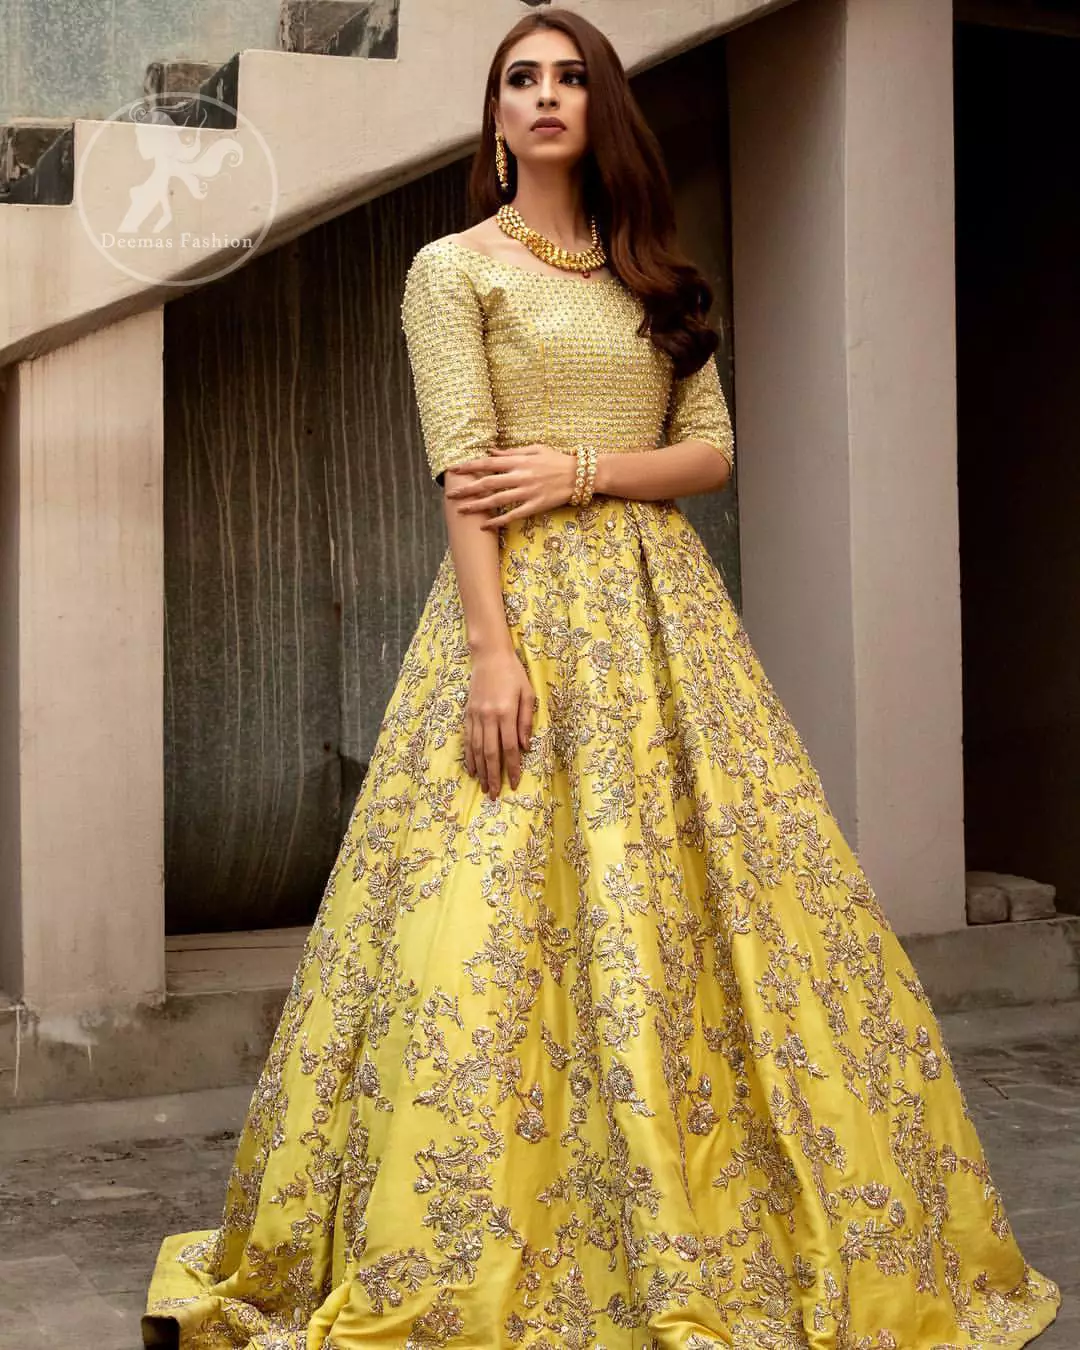 Tradition meets modernity. Exhibit elegance in this yellow blouse lehengha enhanced with kora and dabka embroidery adorned with Swarovski crystals and zardozi is perfect ensemble for mehendi. The outfit is coordinated with tissue dupatta with hand embroidered borders on all four sides and zardozi sequins work on the ground. It comes with raw silk fully embroidered lehengha.